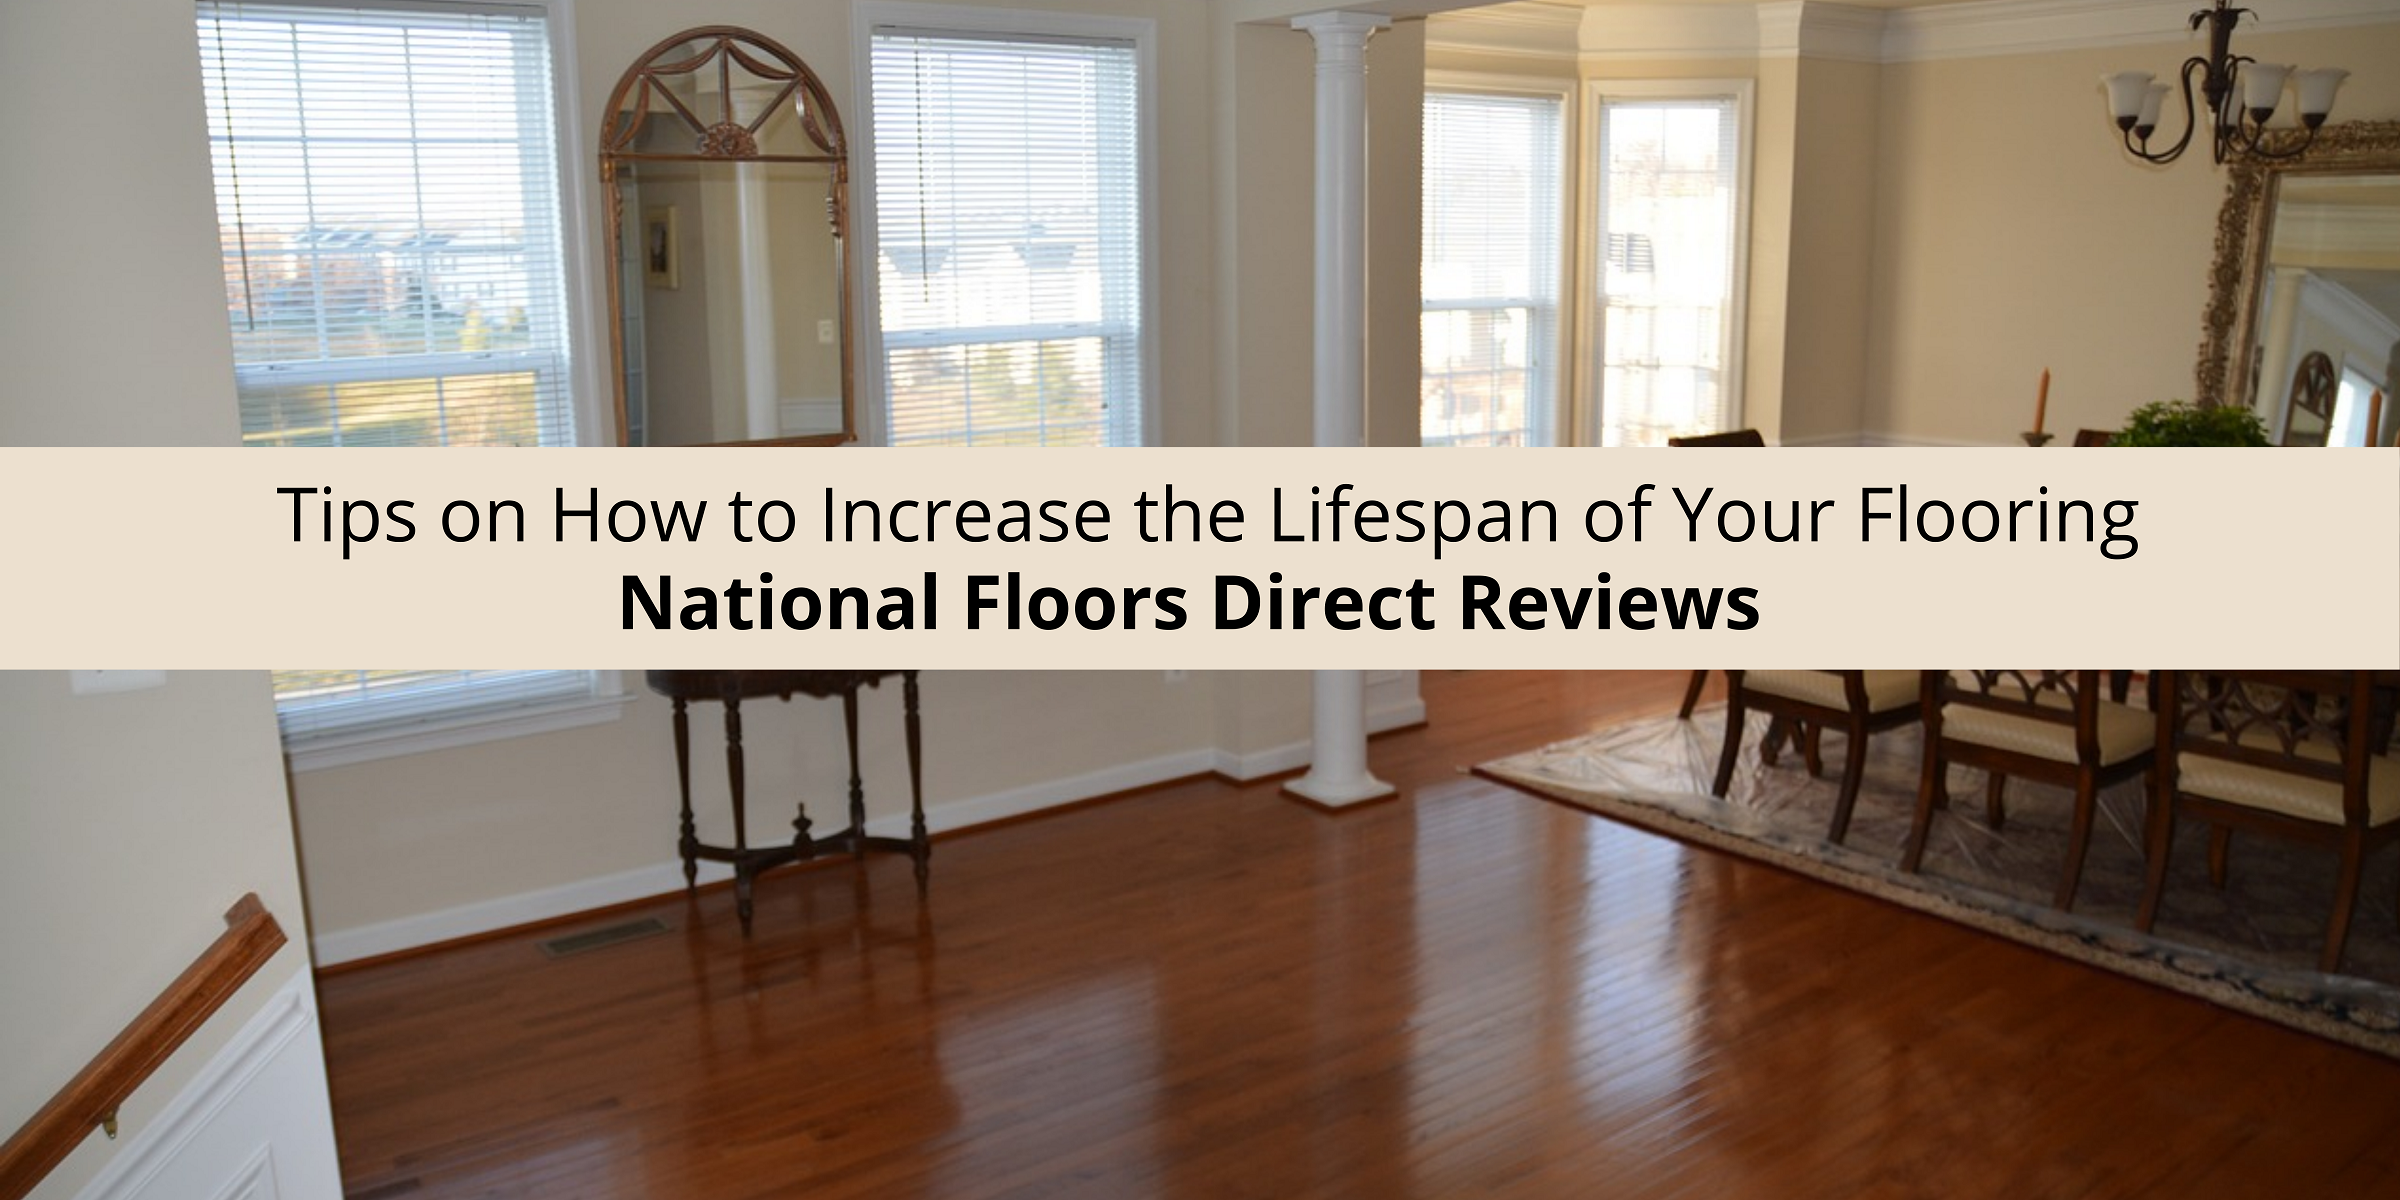 National Floors Direct Reviews Gives Us Tips on Increase the Lifespan